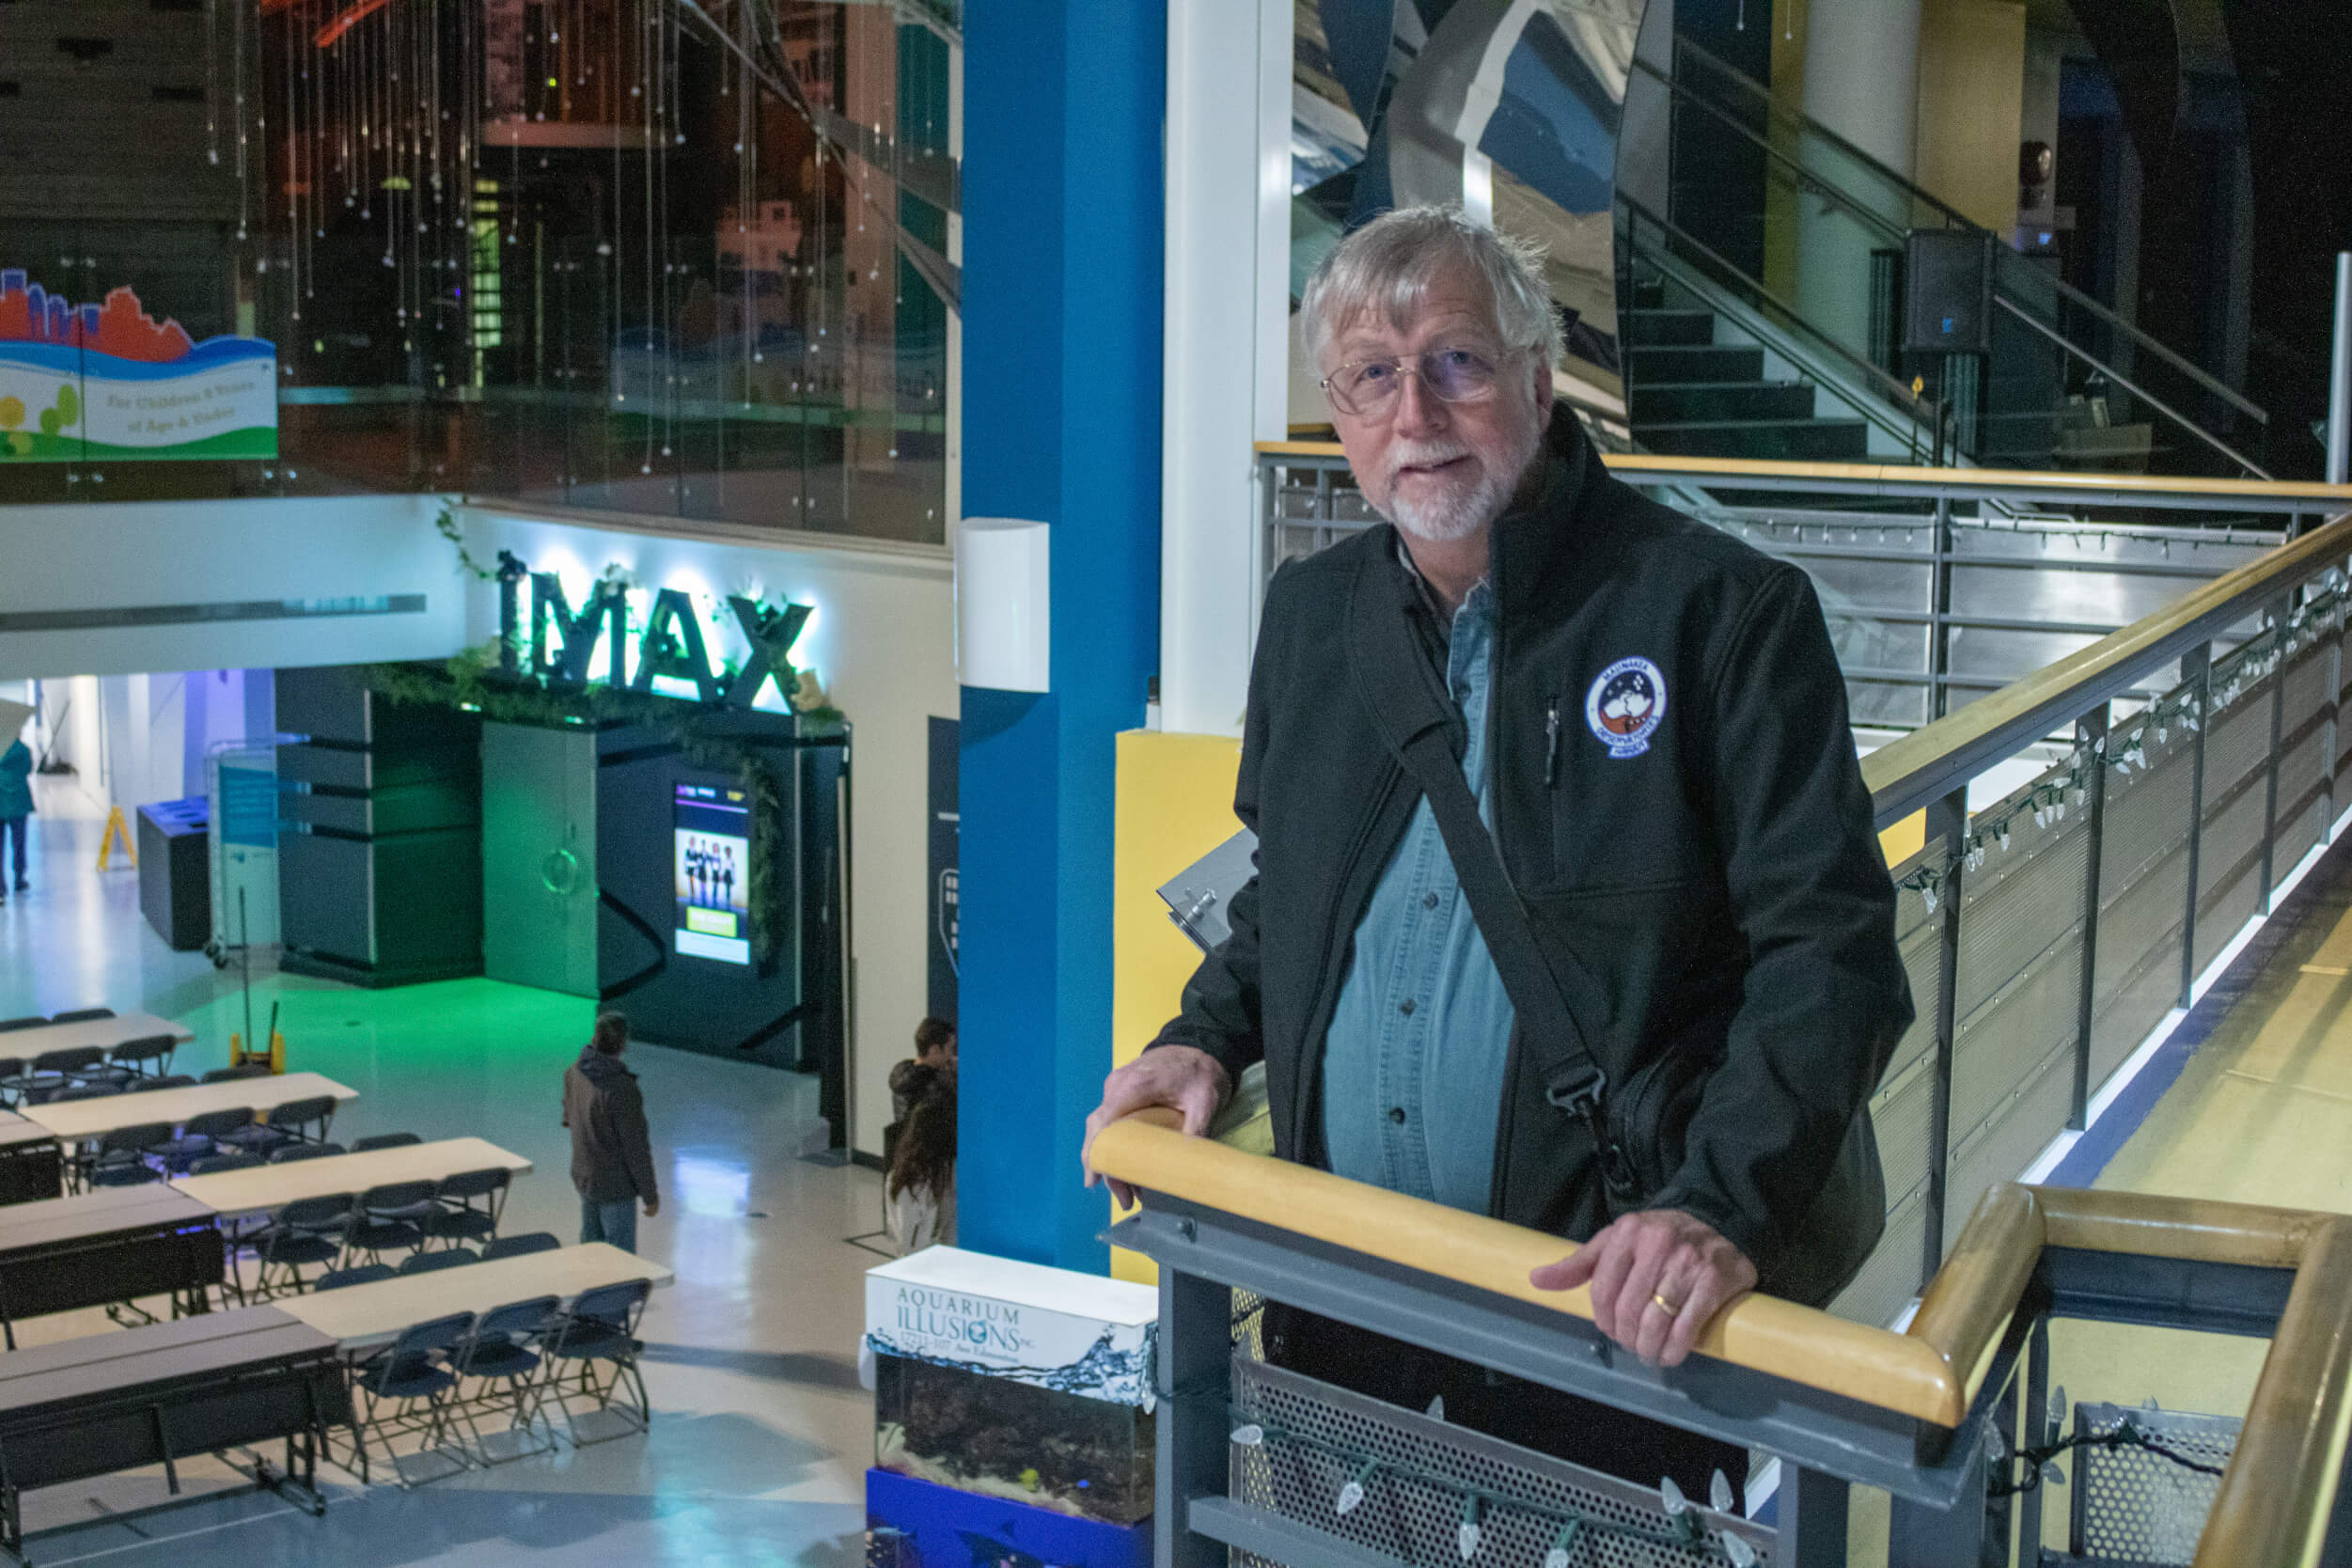 Athabasca University astronomy professor Dr. Martin Connors at the Telus World of Science in Edmonton Oct. 22 before speaking to a group of astronomy enthusiasts about how to die on the way to Mars.